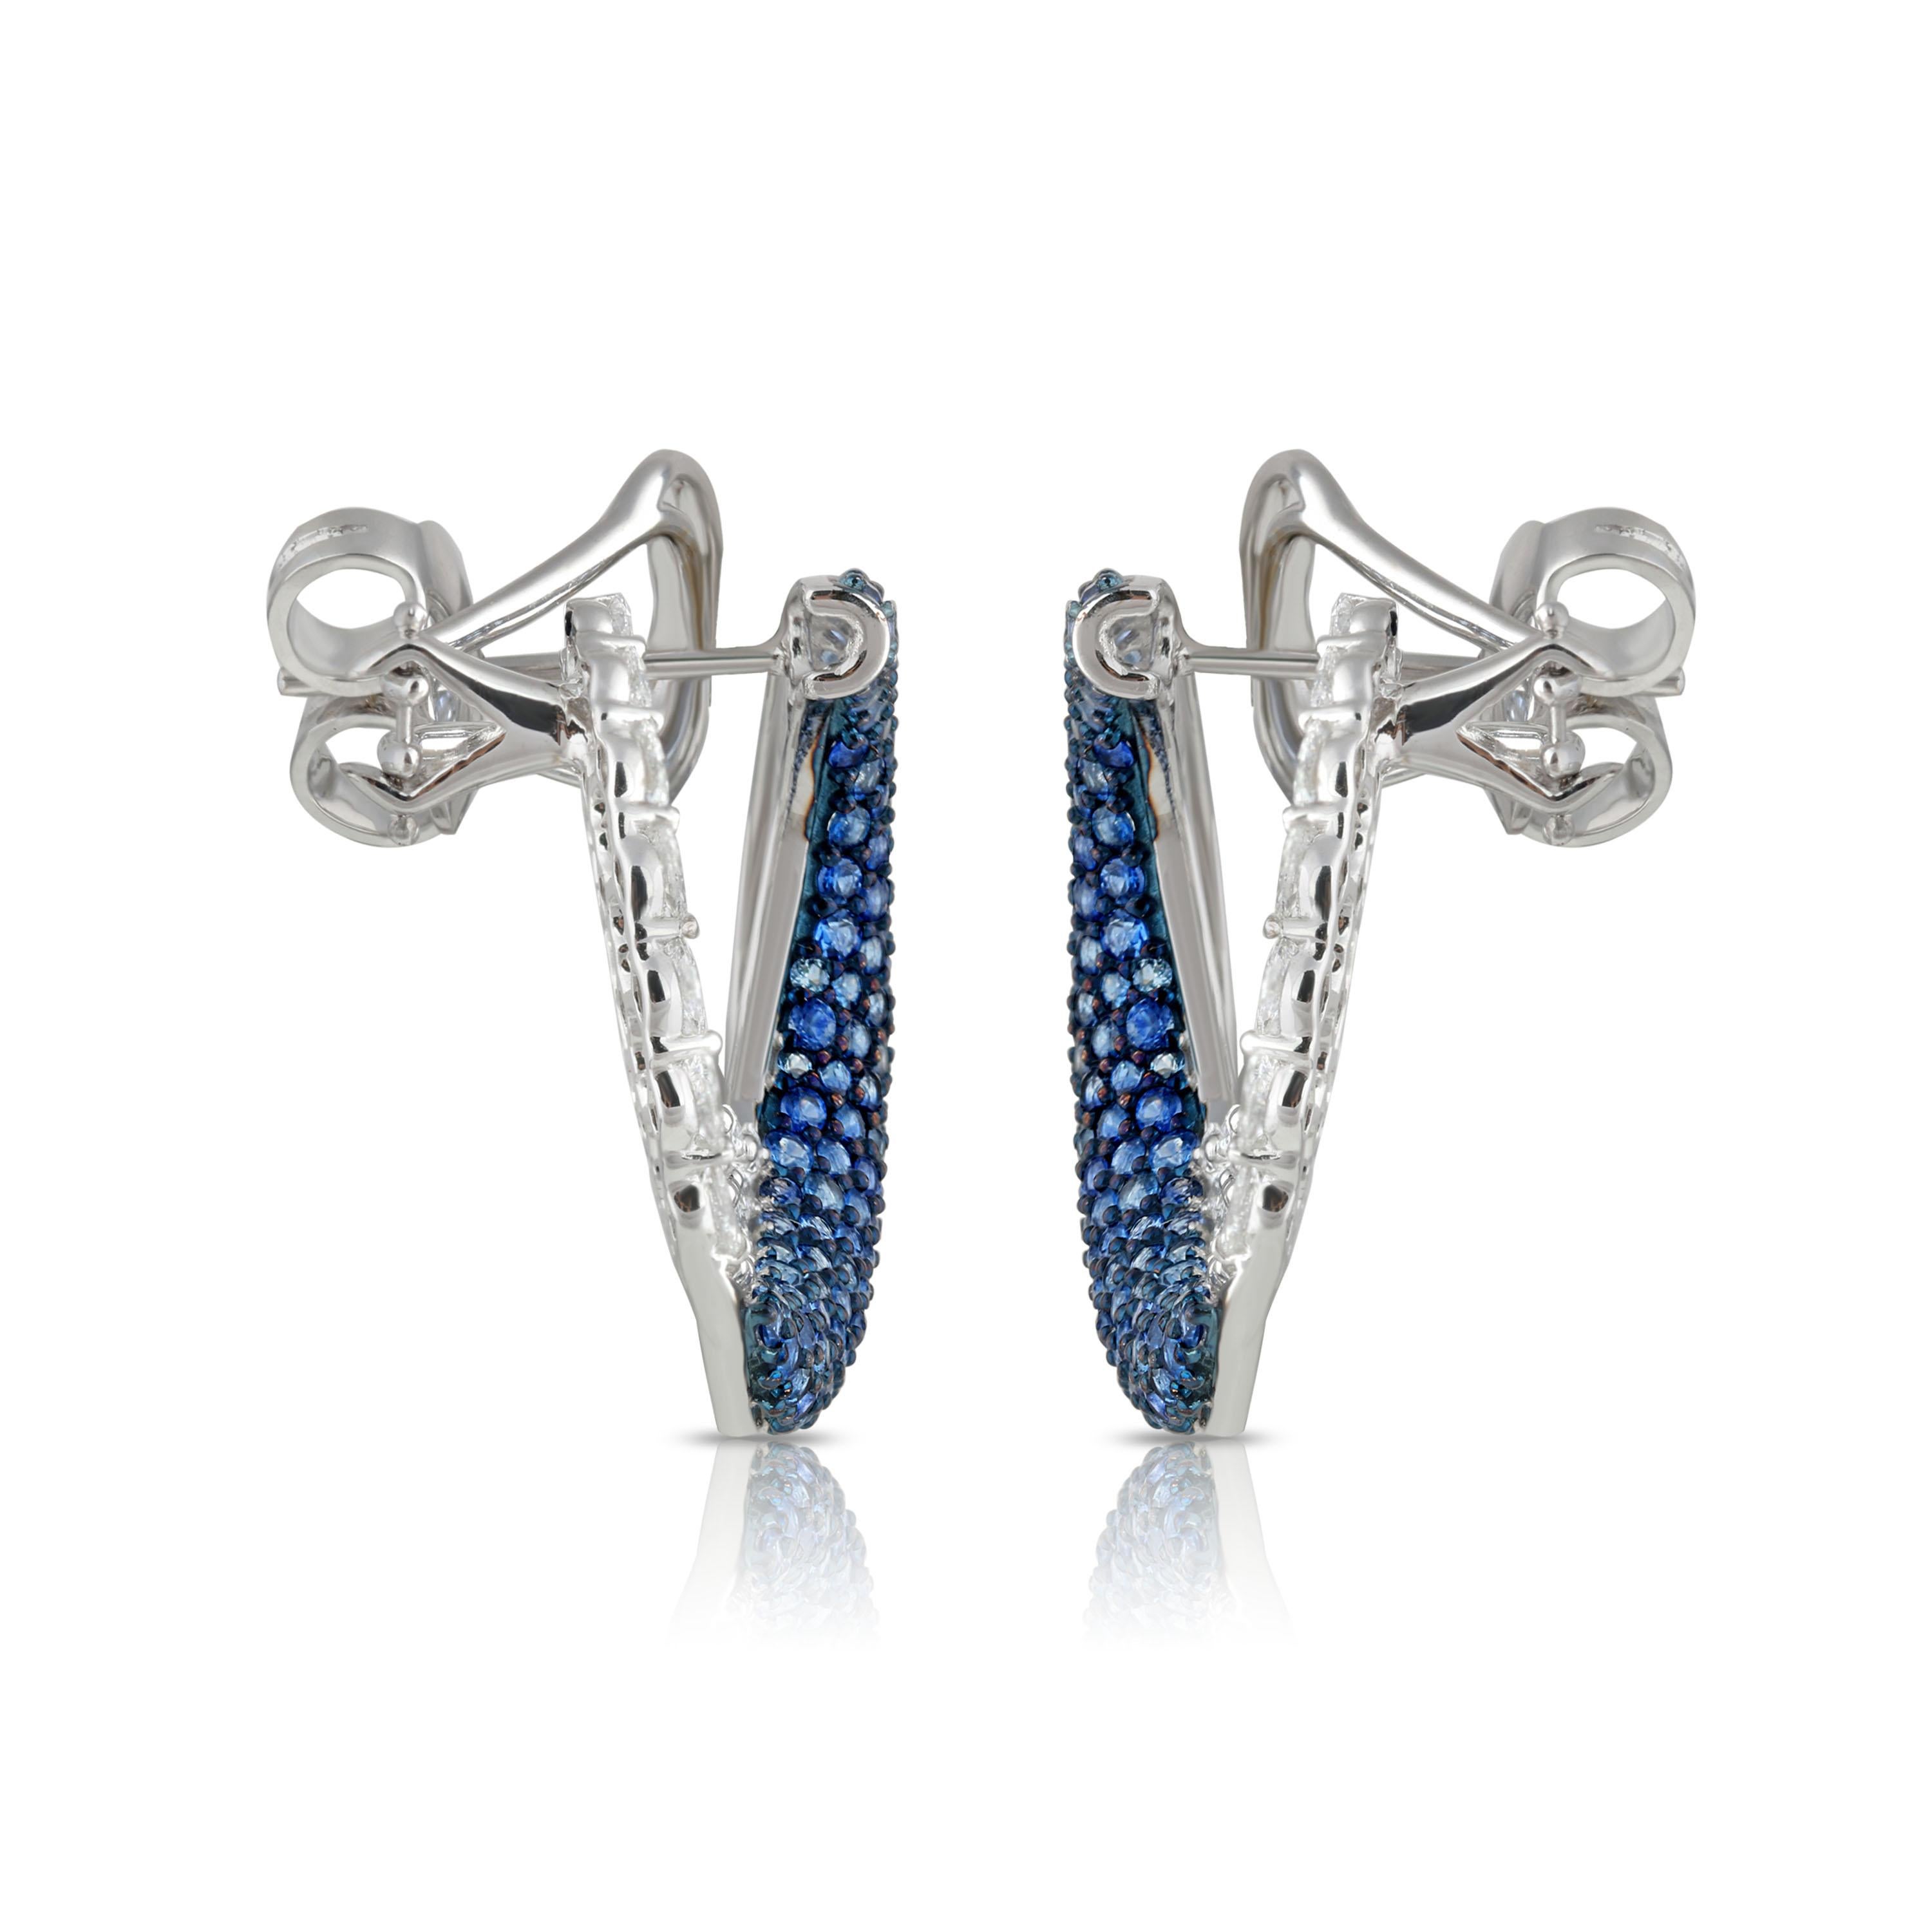 Contemporary Studio Rêves Marquise Diamonds and Blue Sapphire Earrings in 18 Karat Gold